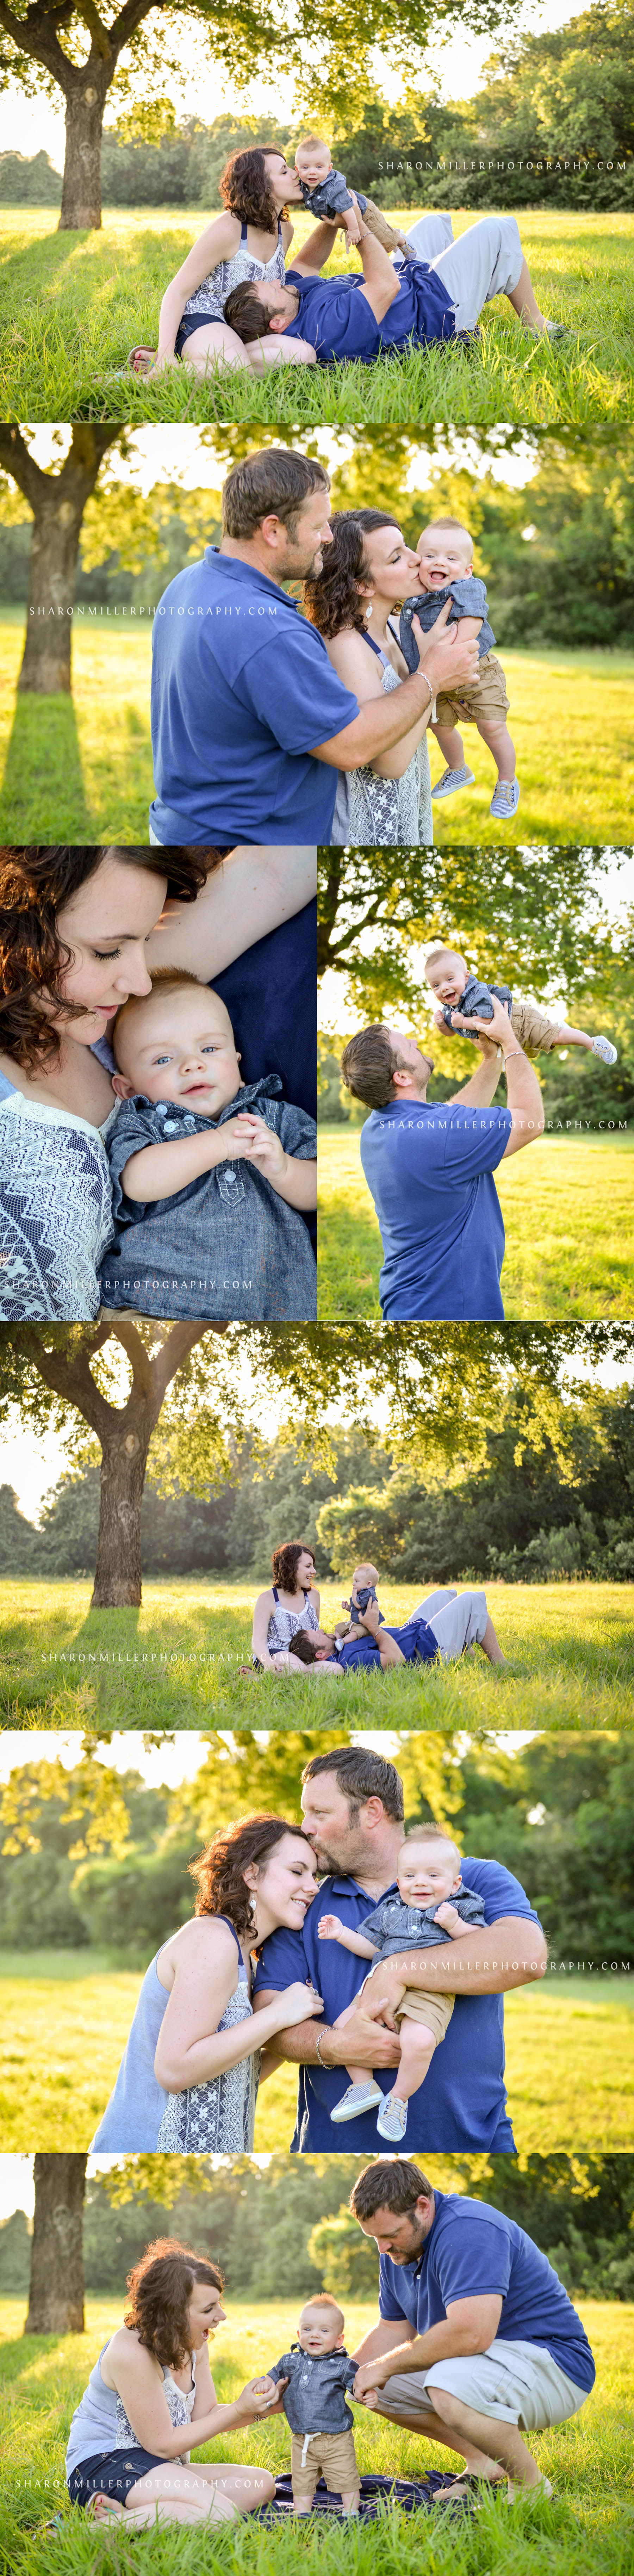 photo session for a family of three under an old tree | Lewisville family photographer Sharon Miller